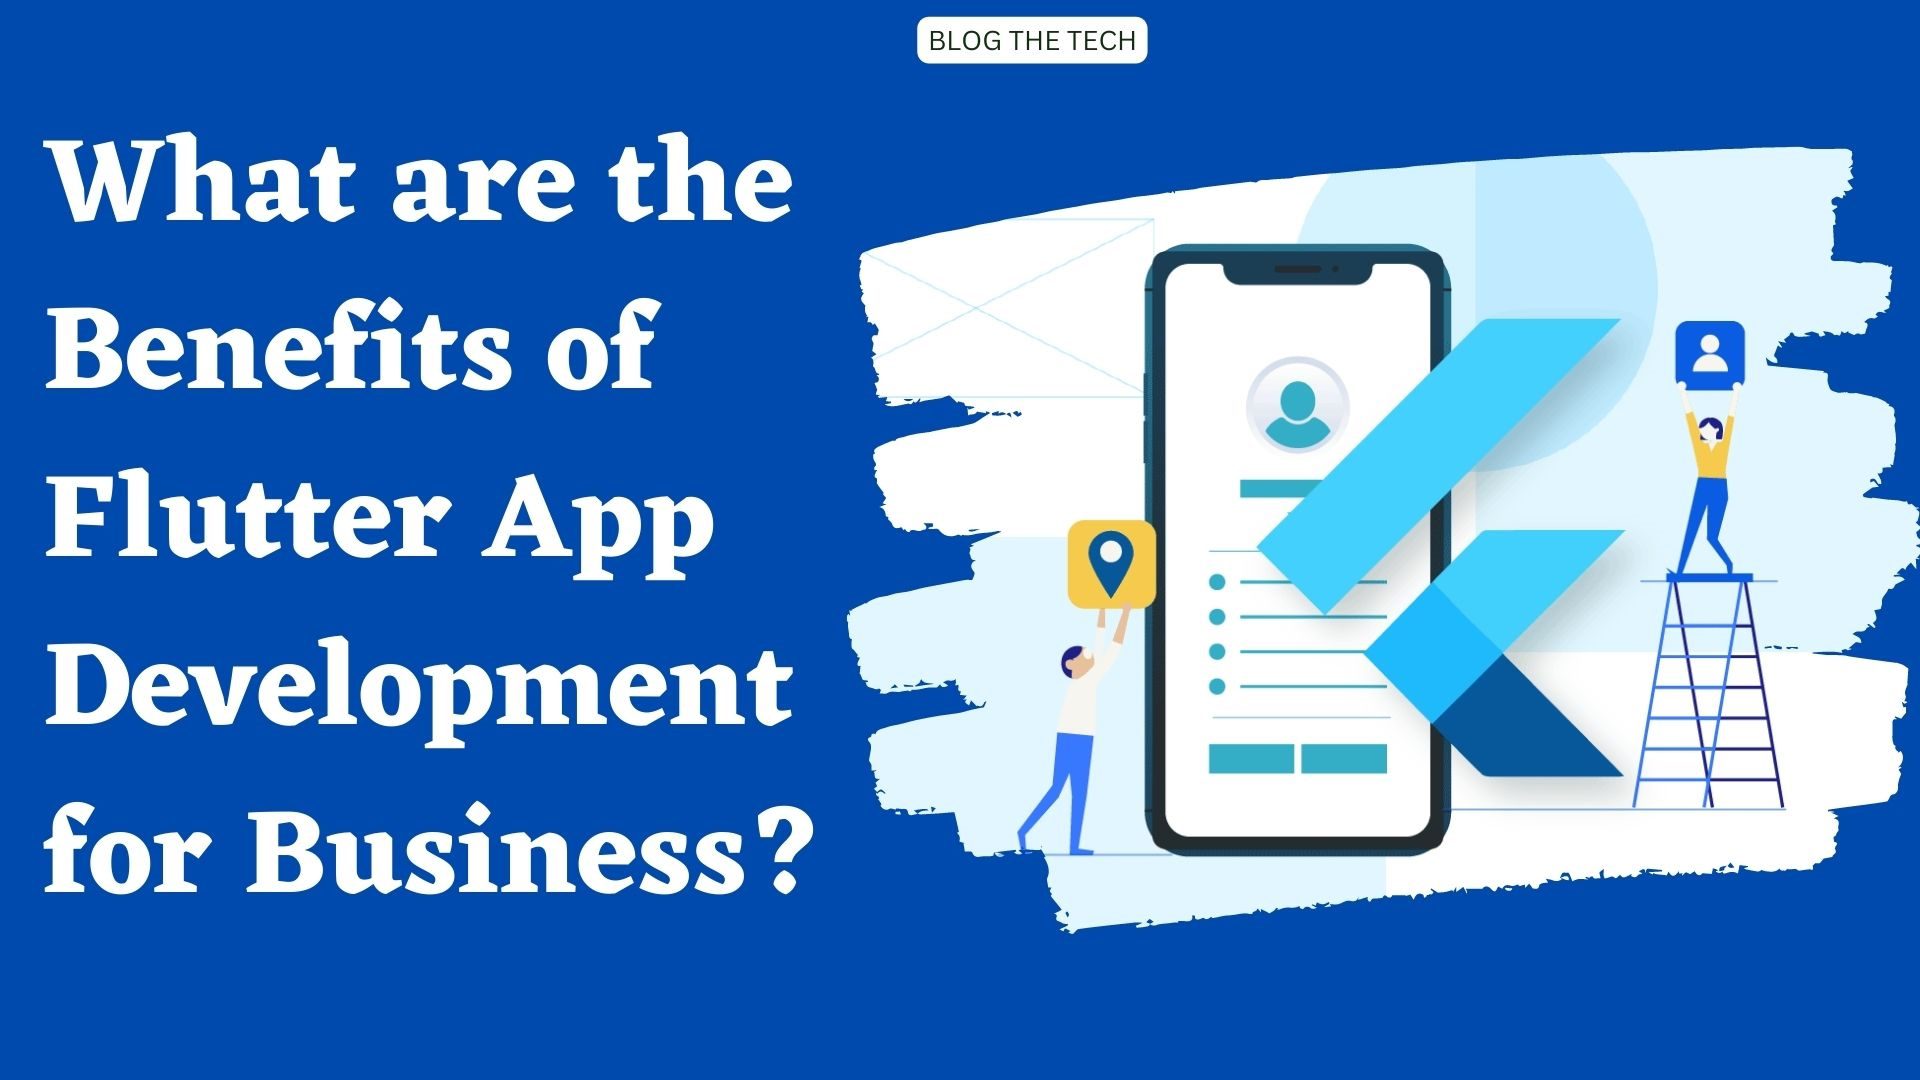 What are the Benefits of Flutter App Development for Business?